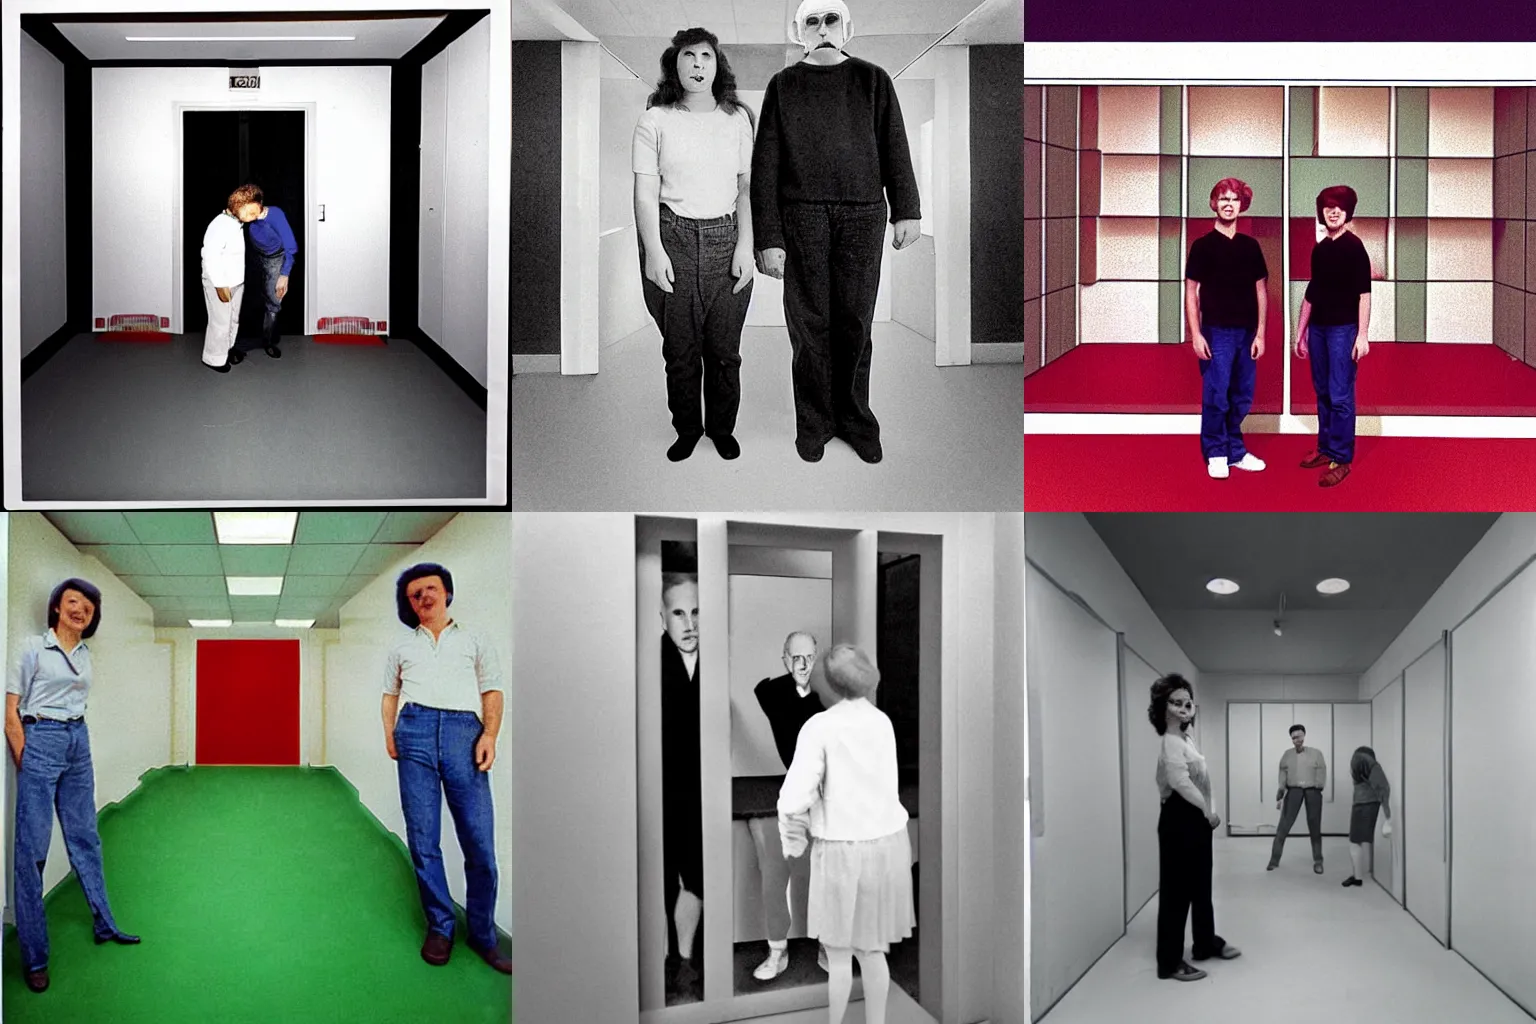 Prompt: Ames Room optical illusion photograph where one person looks big and the other person looks small